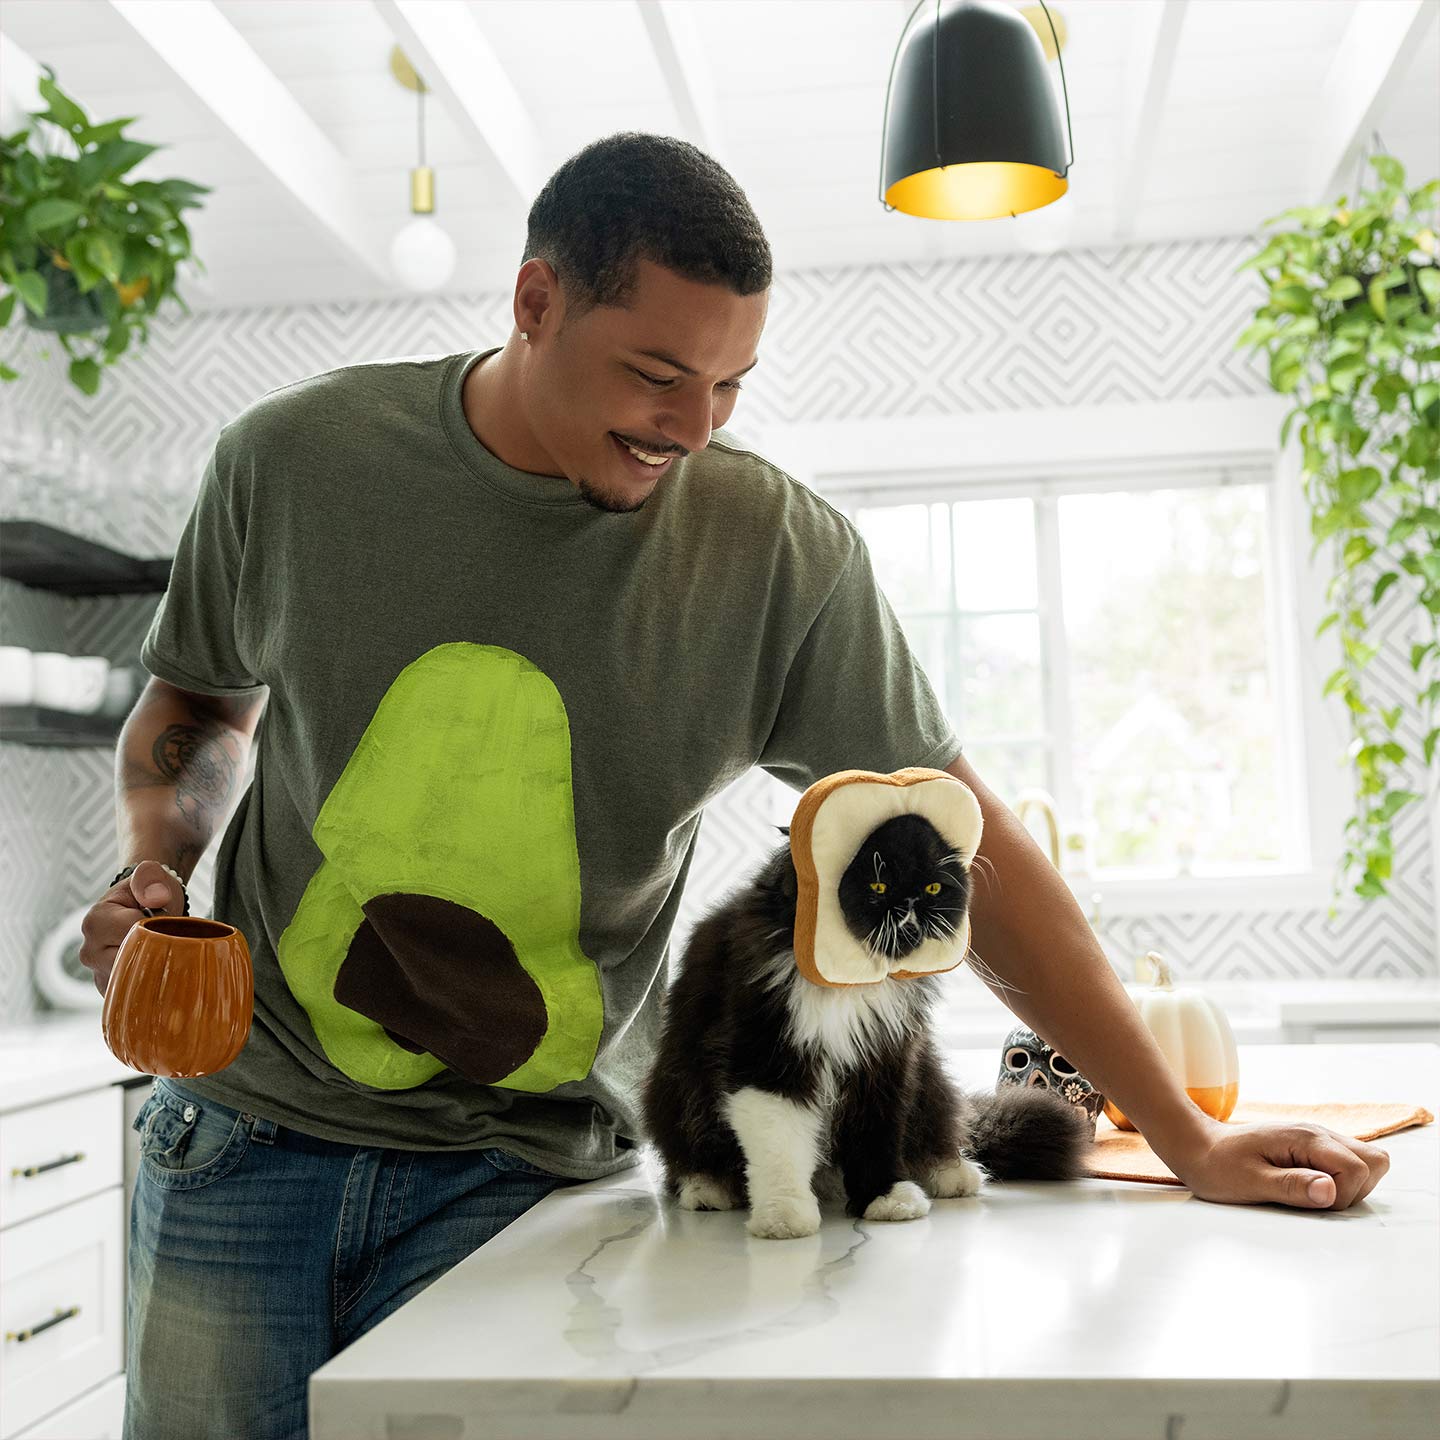 Man wearing avocado tee shirt with cat dressed as toast.